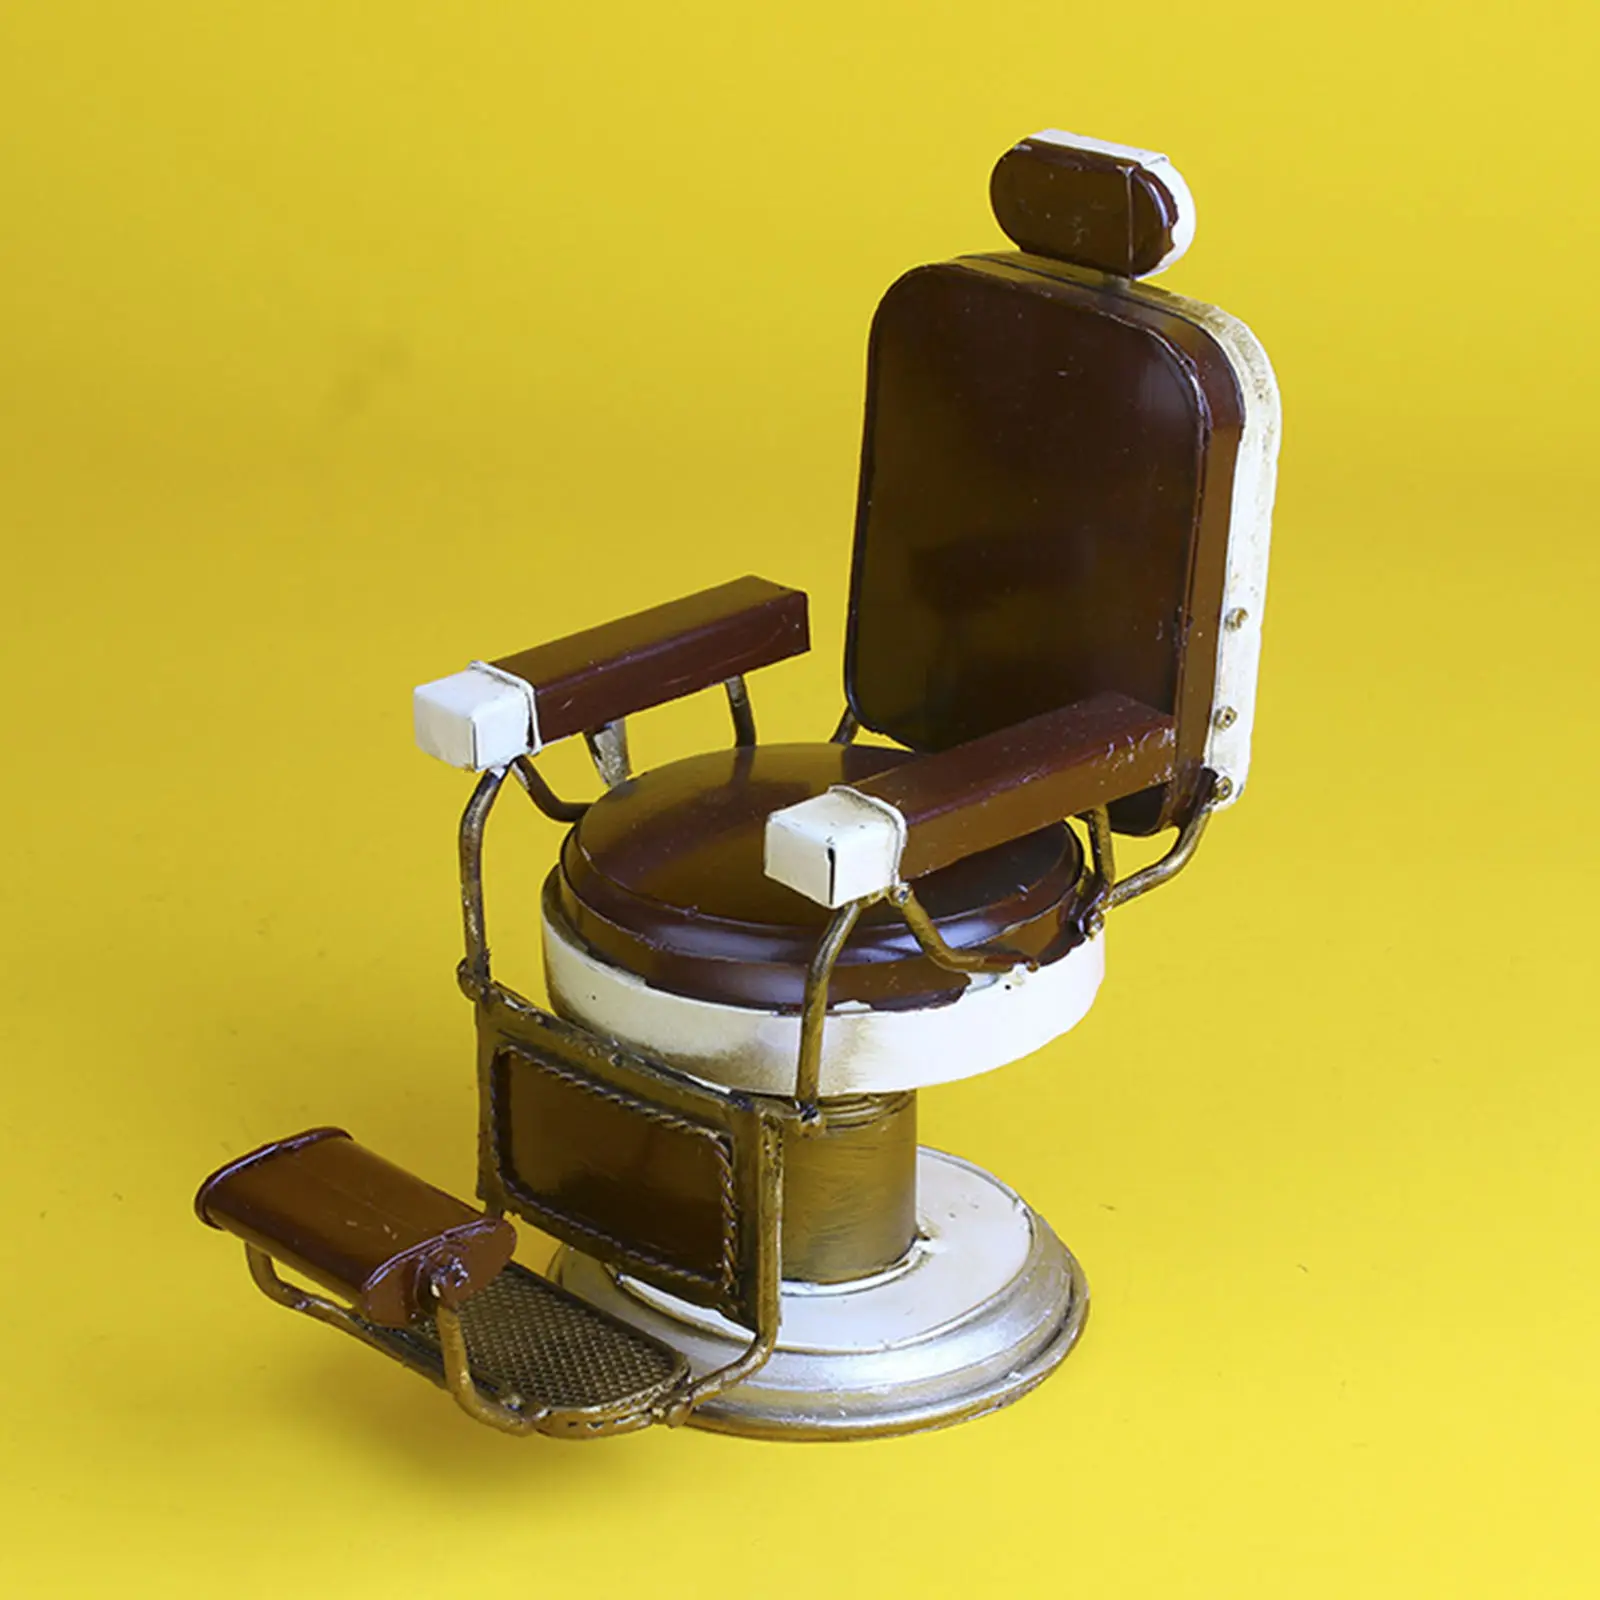 Barber Shop Chair Retro Collectible Creative Handmade American Vintage Decor Miniature Model Toy Model Decorations for Home Gift